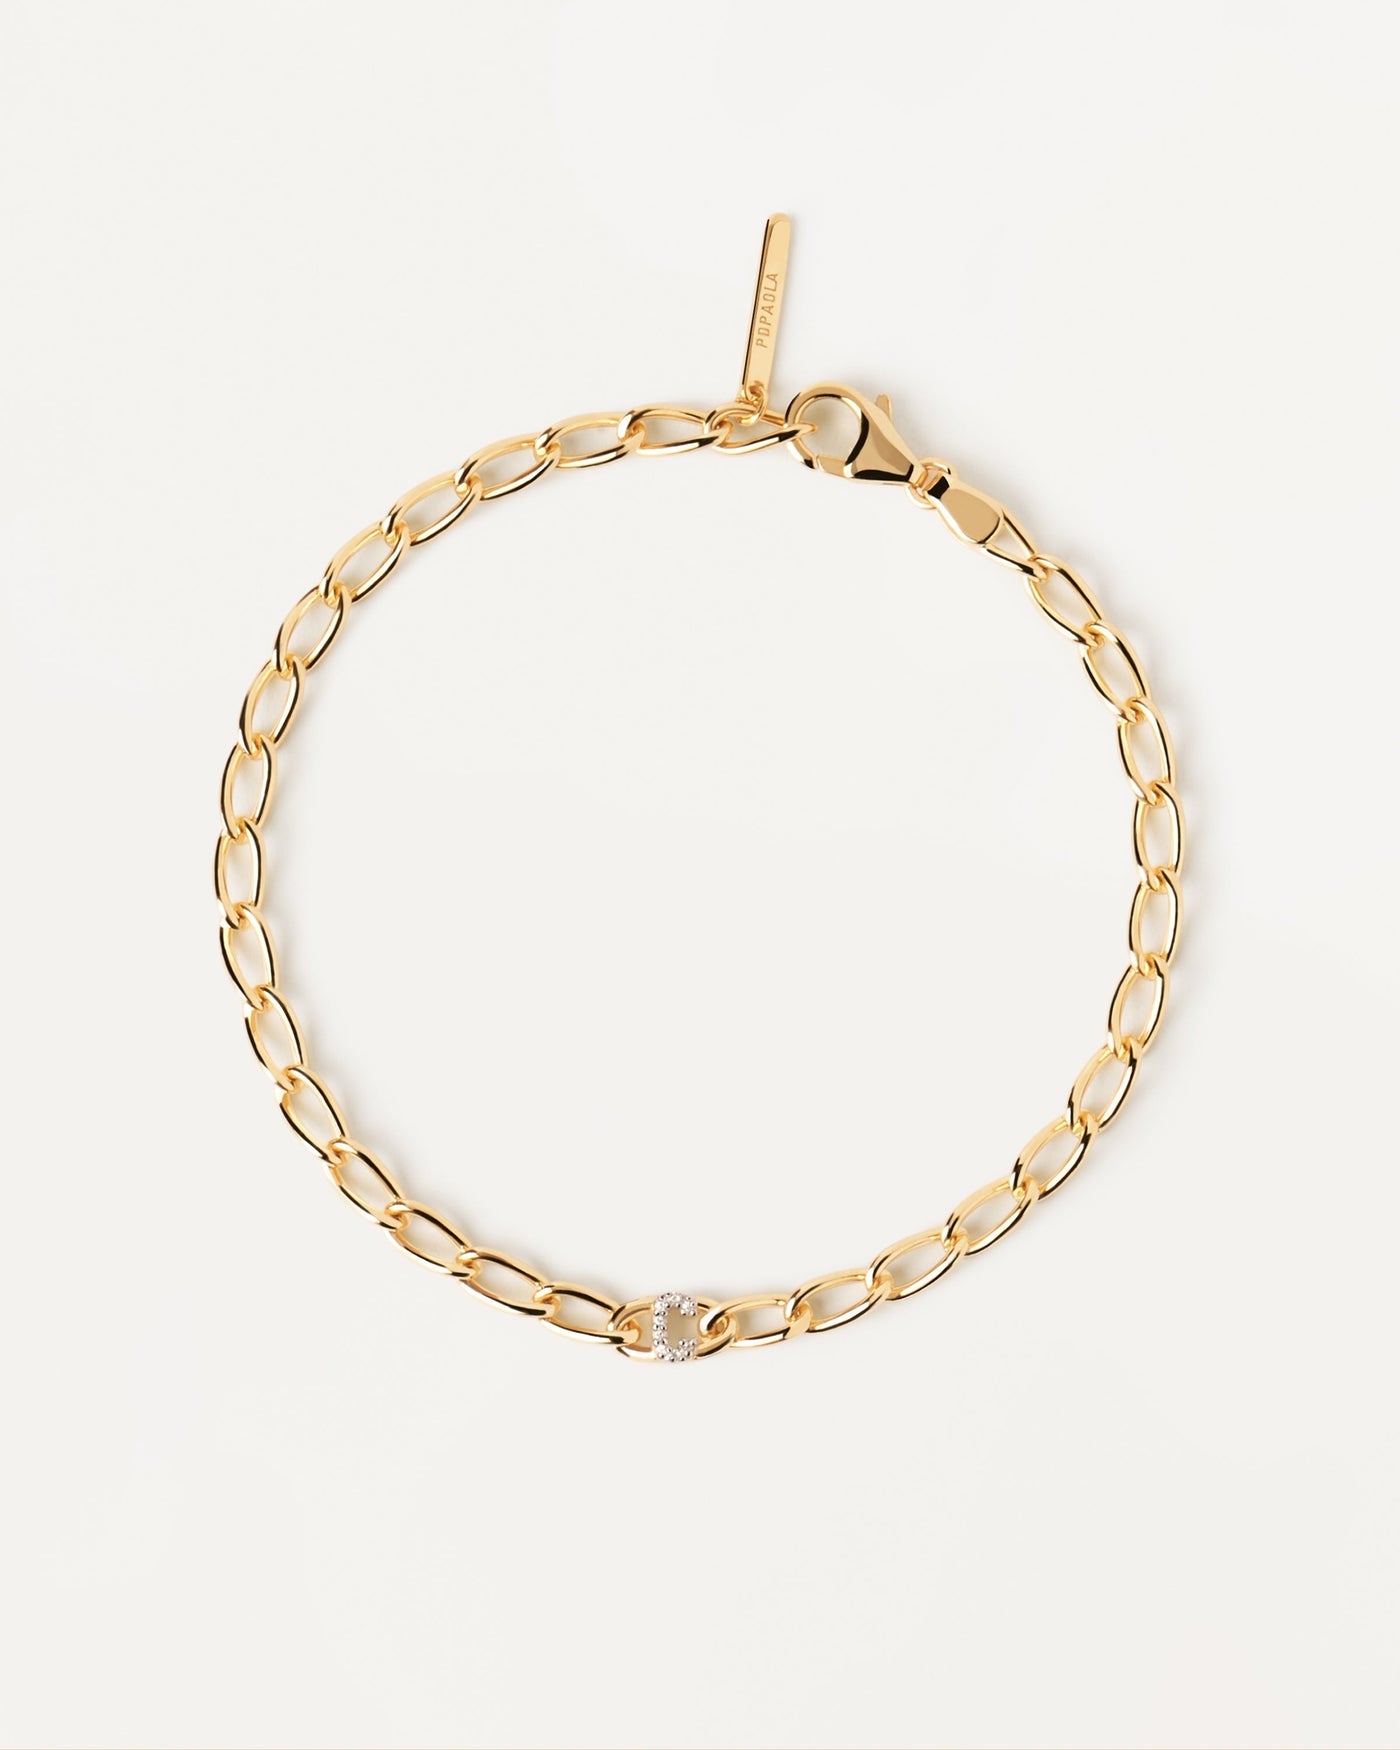 2023 Selection | Letter C Chain Bracelet. cable chain bracelet in gold-plated silver with initial C in zirconia. Get the latest arrival from PDPAOLA. Place your order safely and get this Best Seller. Free Shipping.